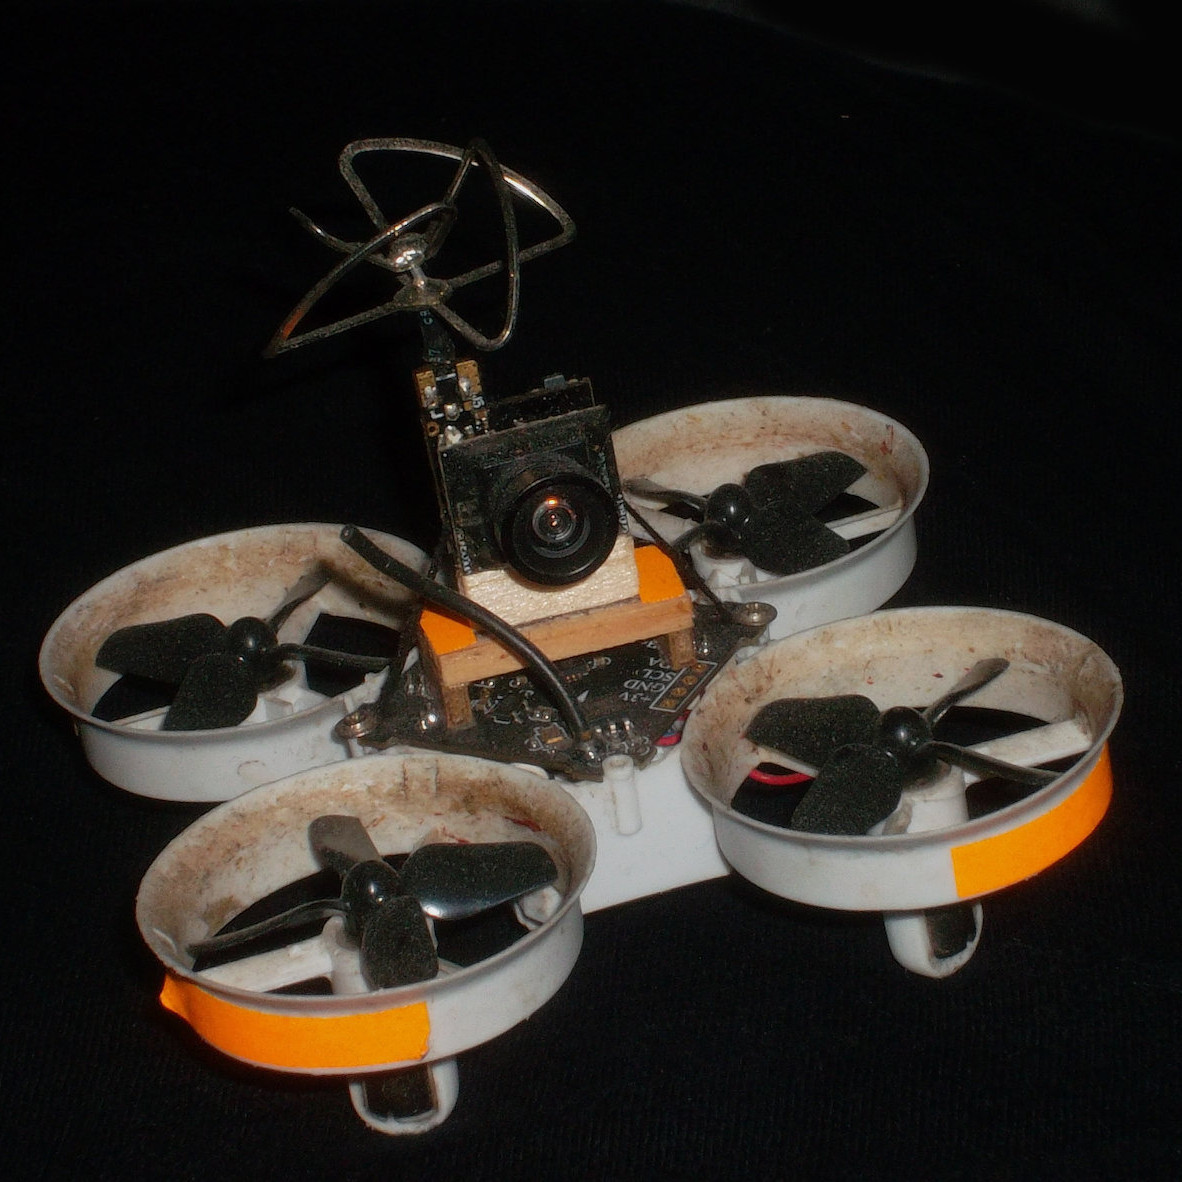 Lost a Lightweight Quadcopter? Here Are The Best Ways To Find It